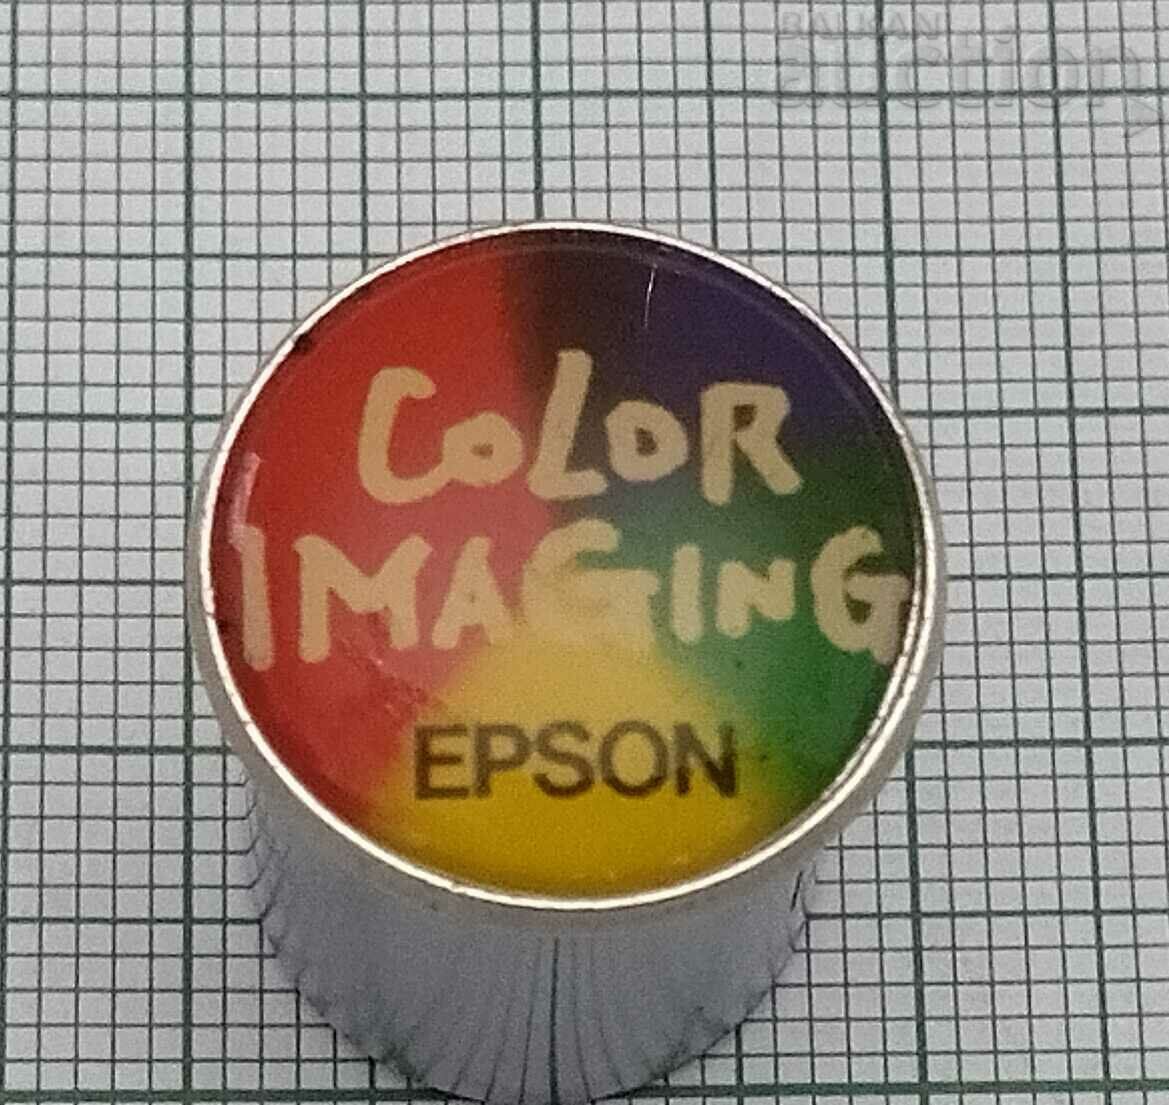 COLOR IMAGING EPSON ЗНАЧКА ПИН